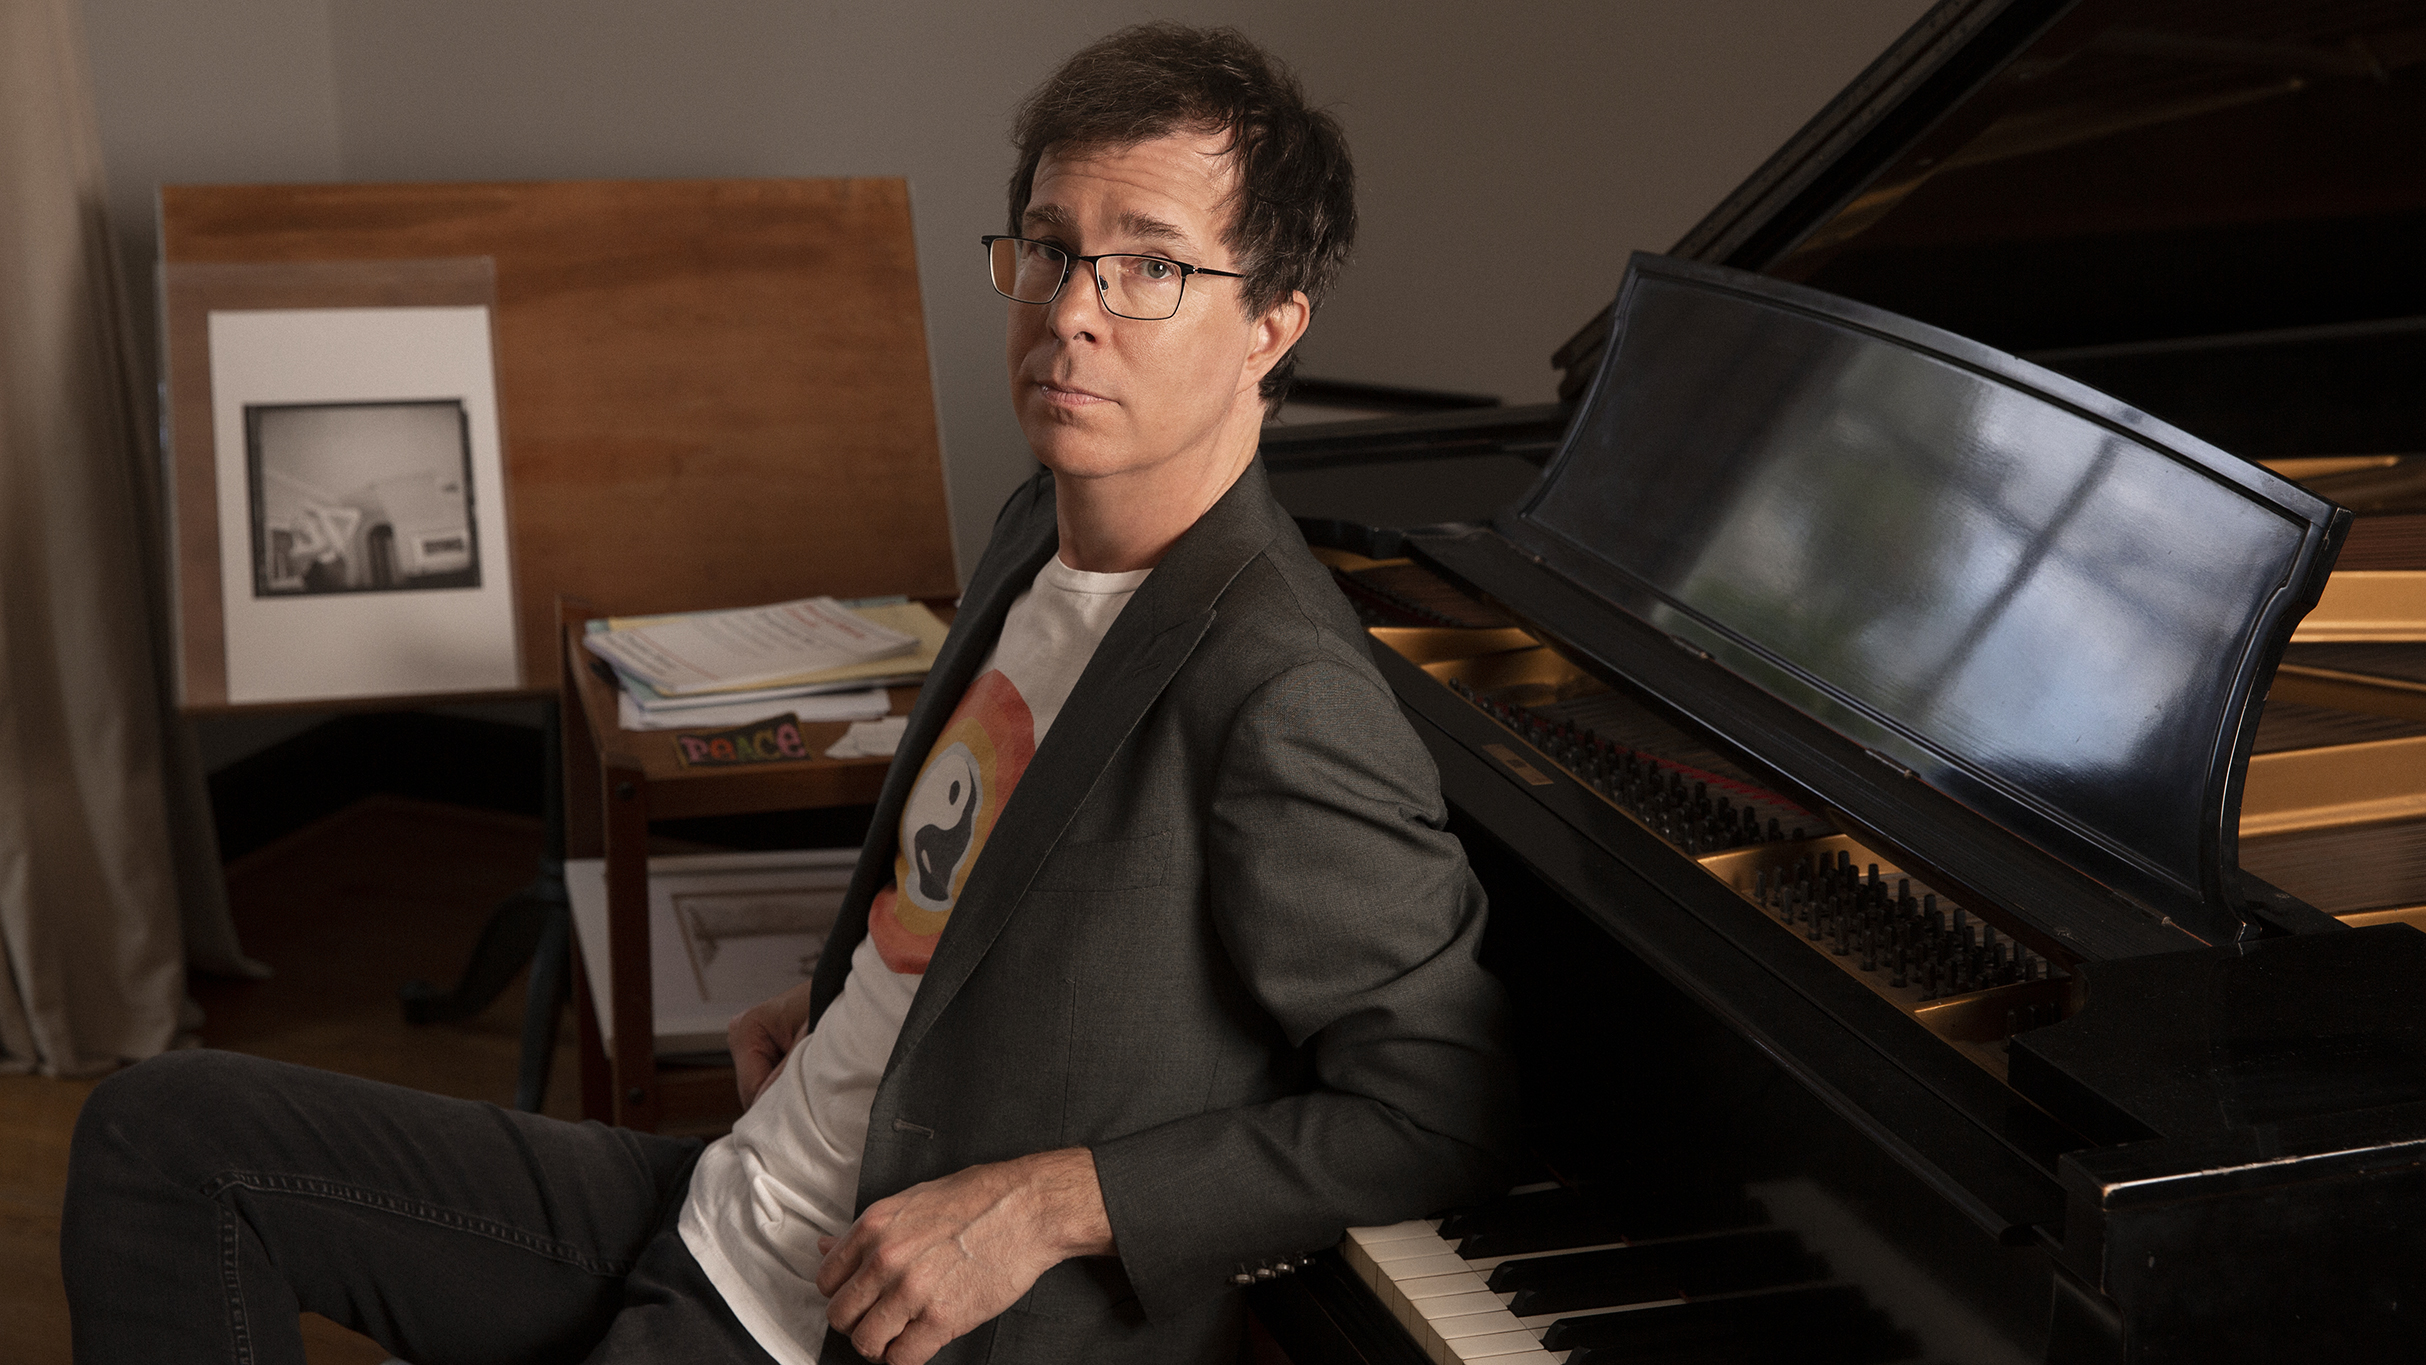 Ben Folds: Paper Airplanes Request Tour